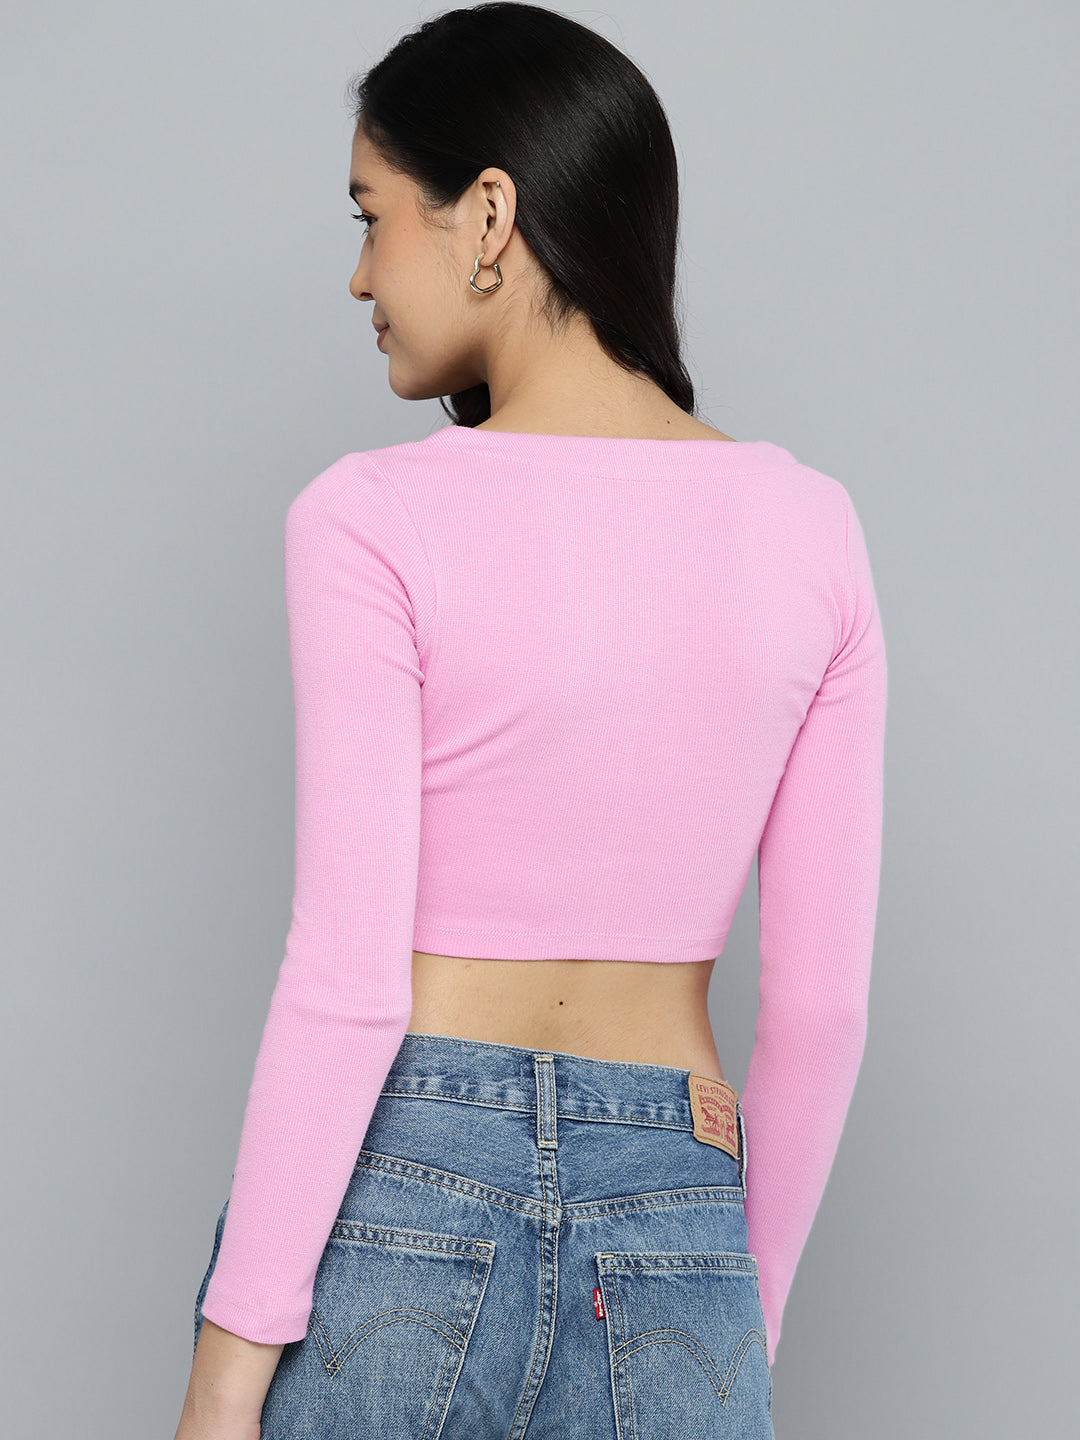 Ambiance Apparel Ambiance Light Pink Crop Top Size M - $9 (64